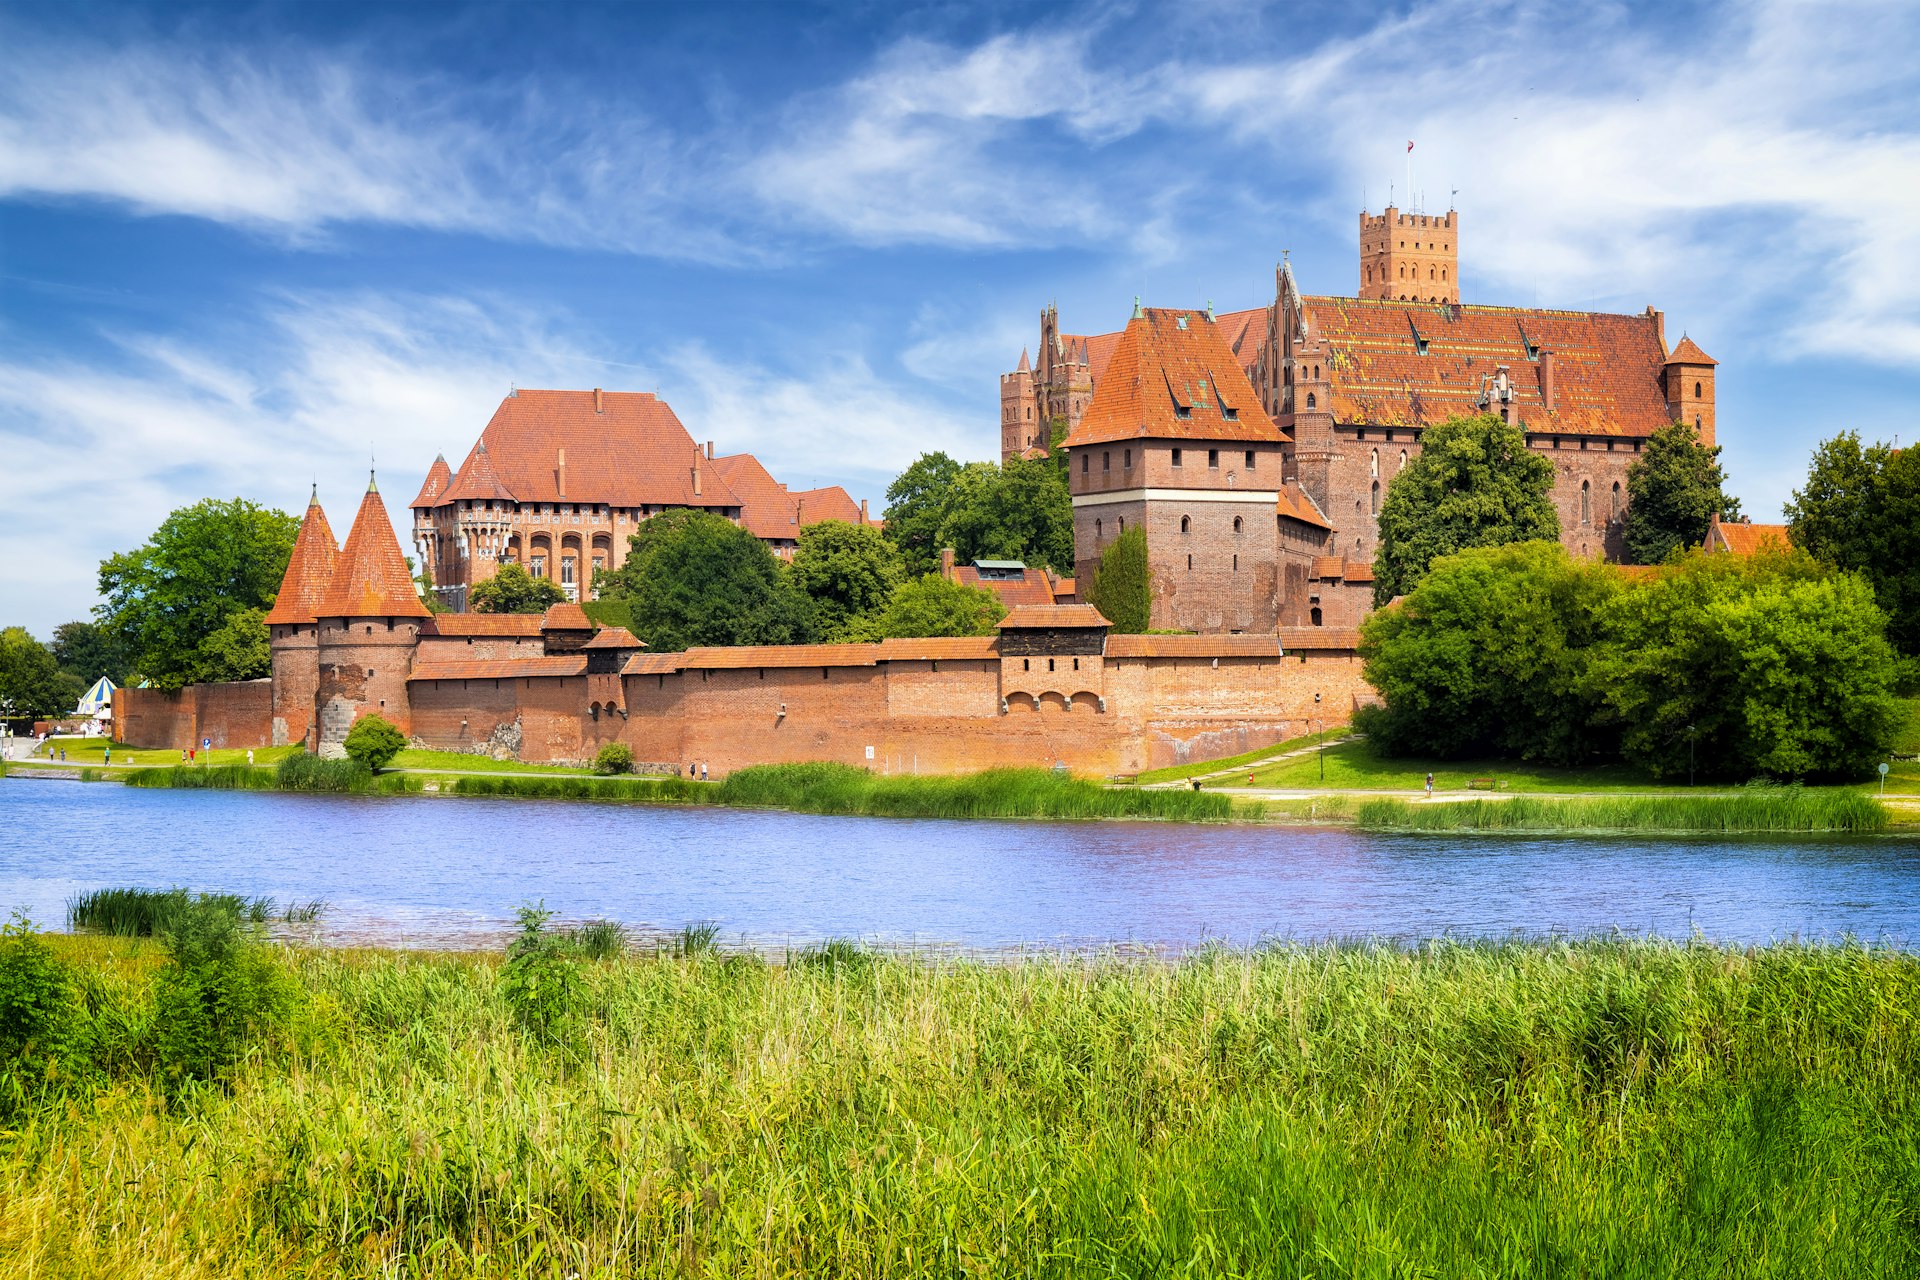 A huge red-brick castle with many towers and battlements stands on the bank of a calm river.